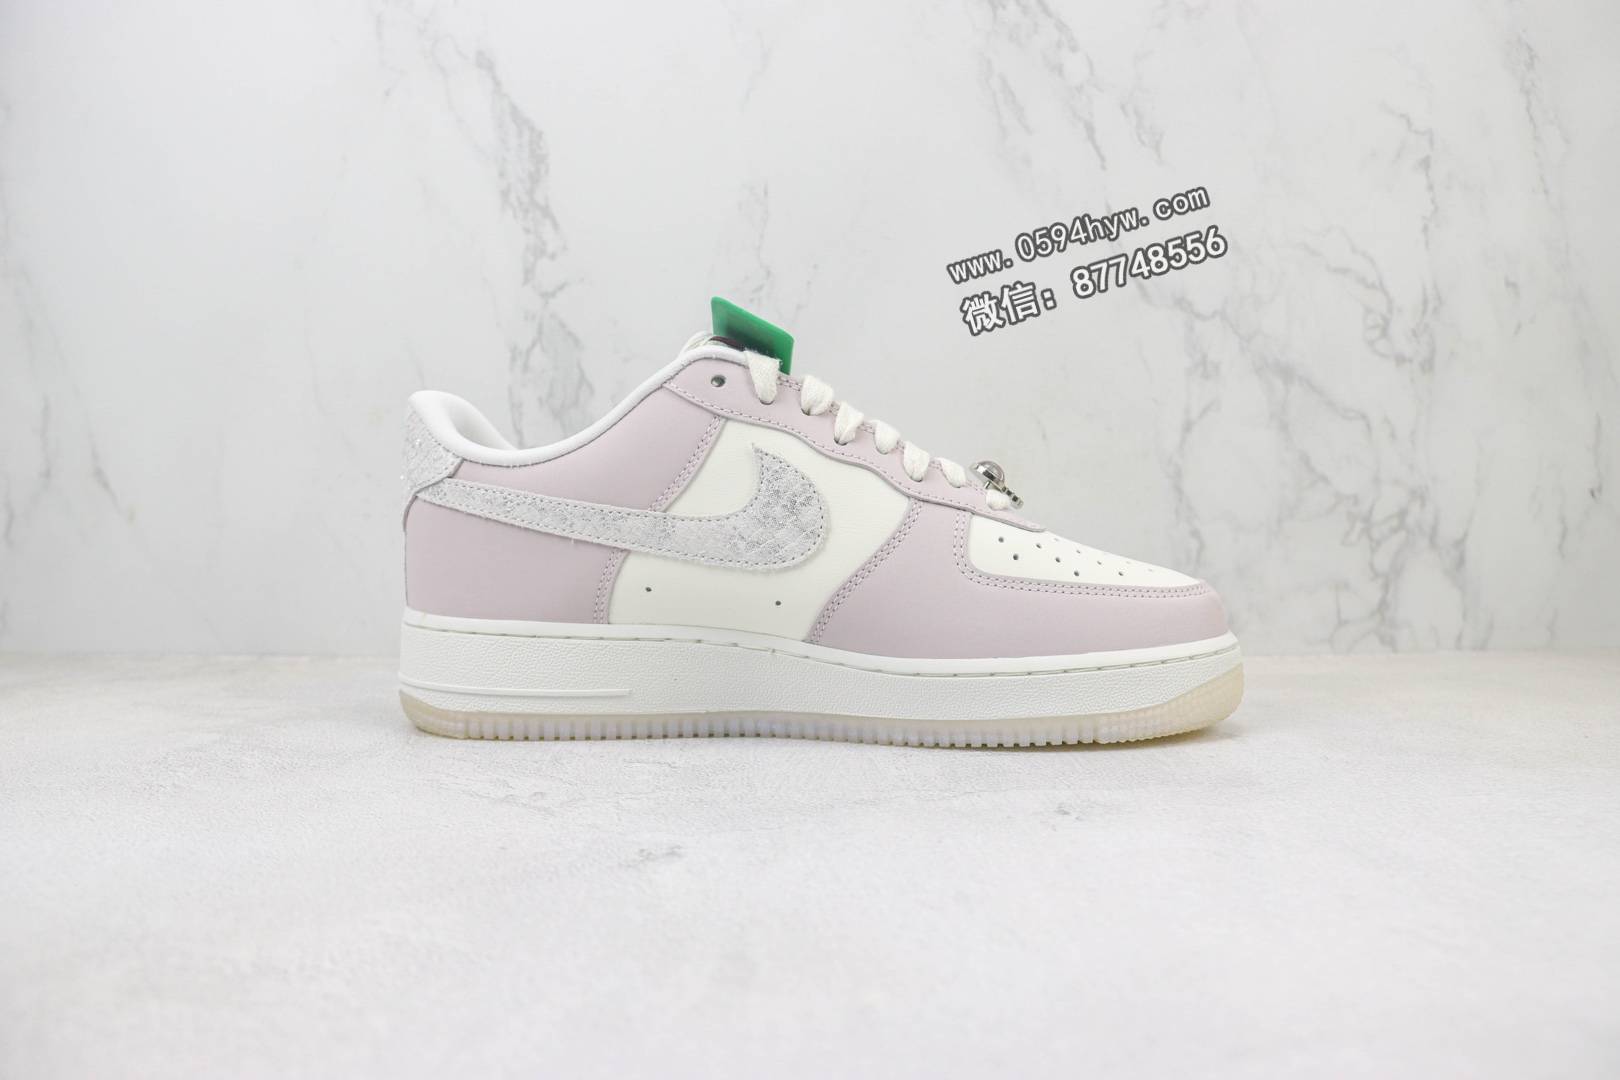 OW, FZ5066-111, FORCE 1, Air Force 1 Low, Air Force 1, AI - Air Force 1 Low BY 白紫 货号：FZ5066-111